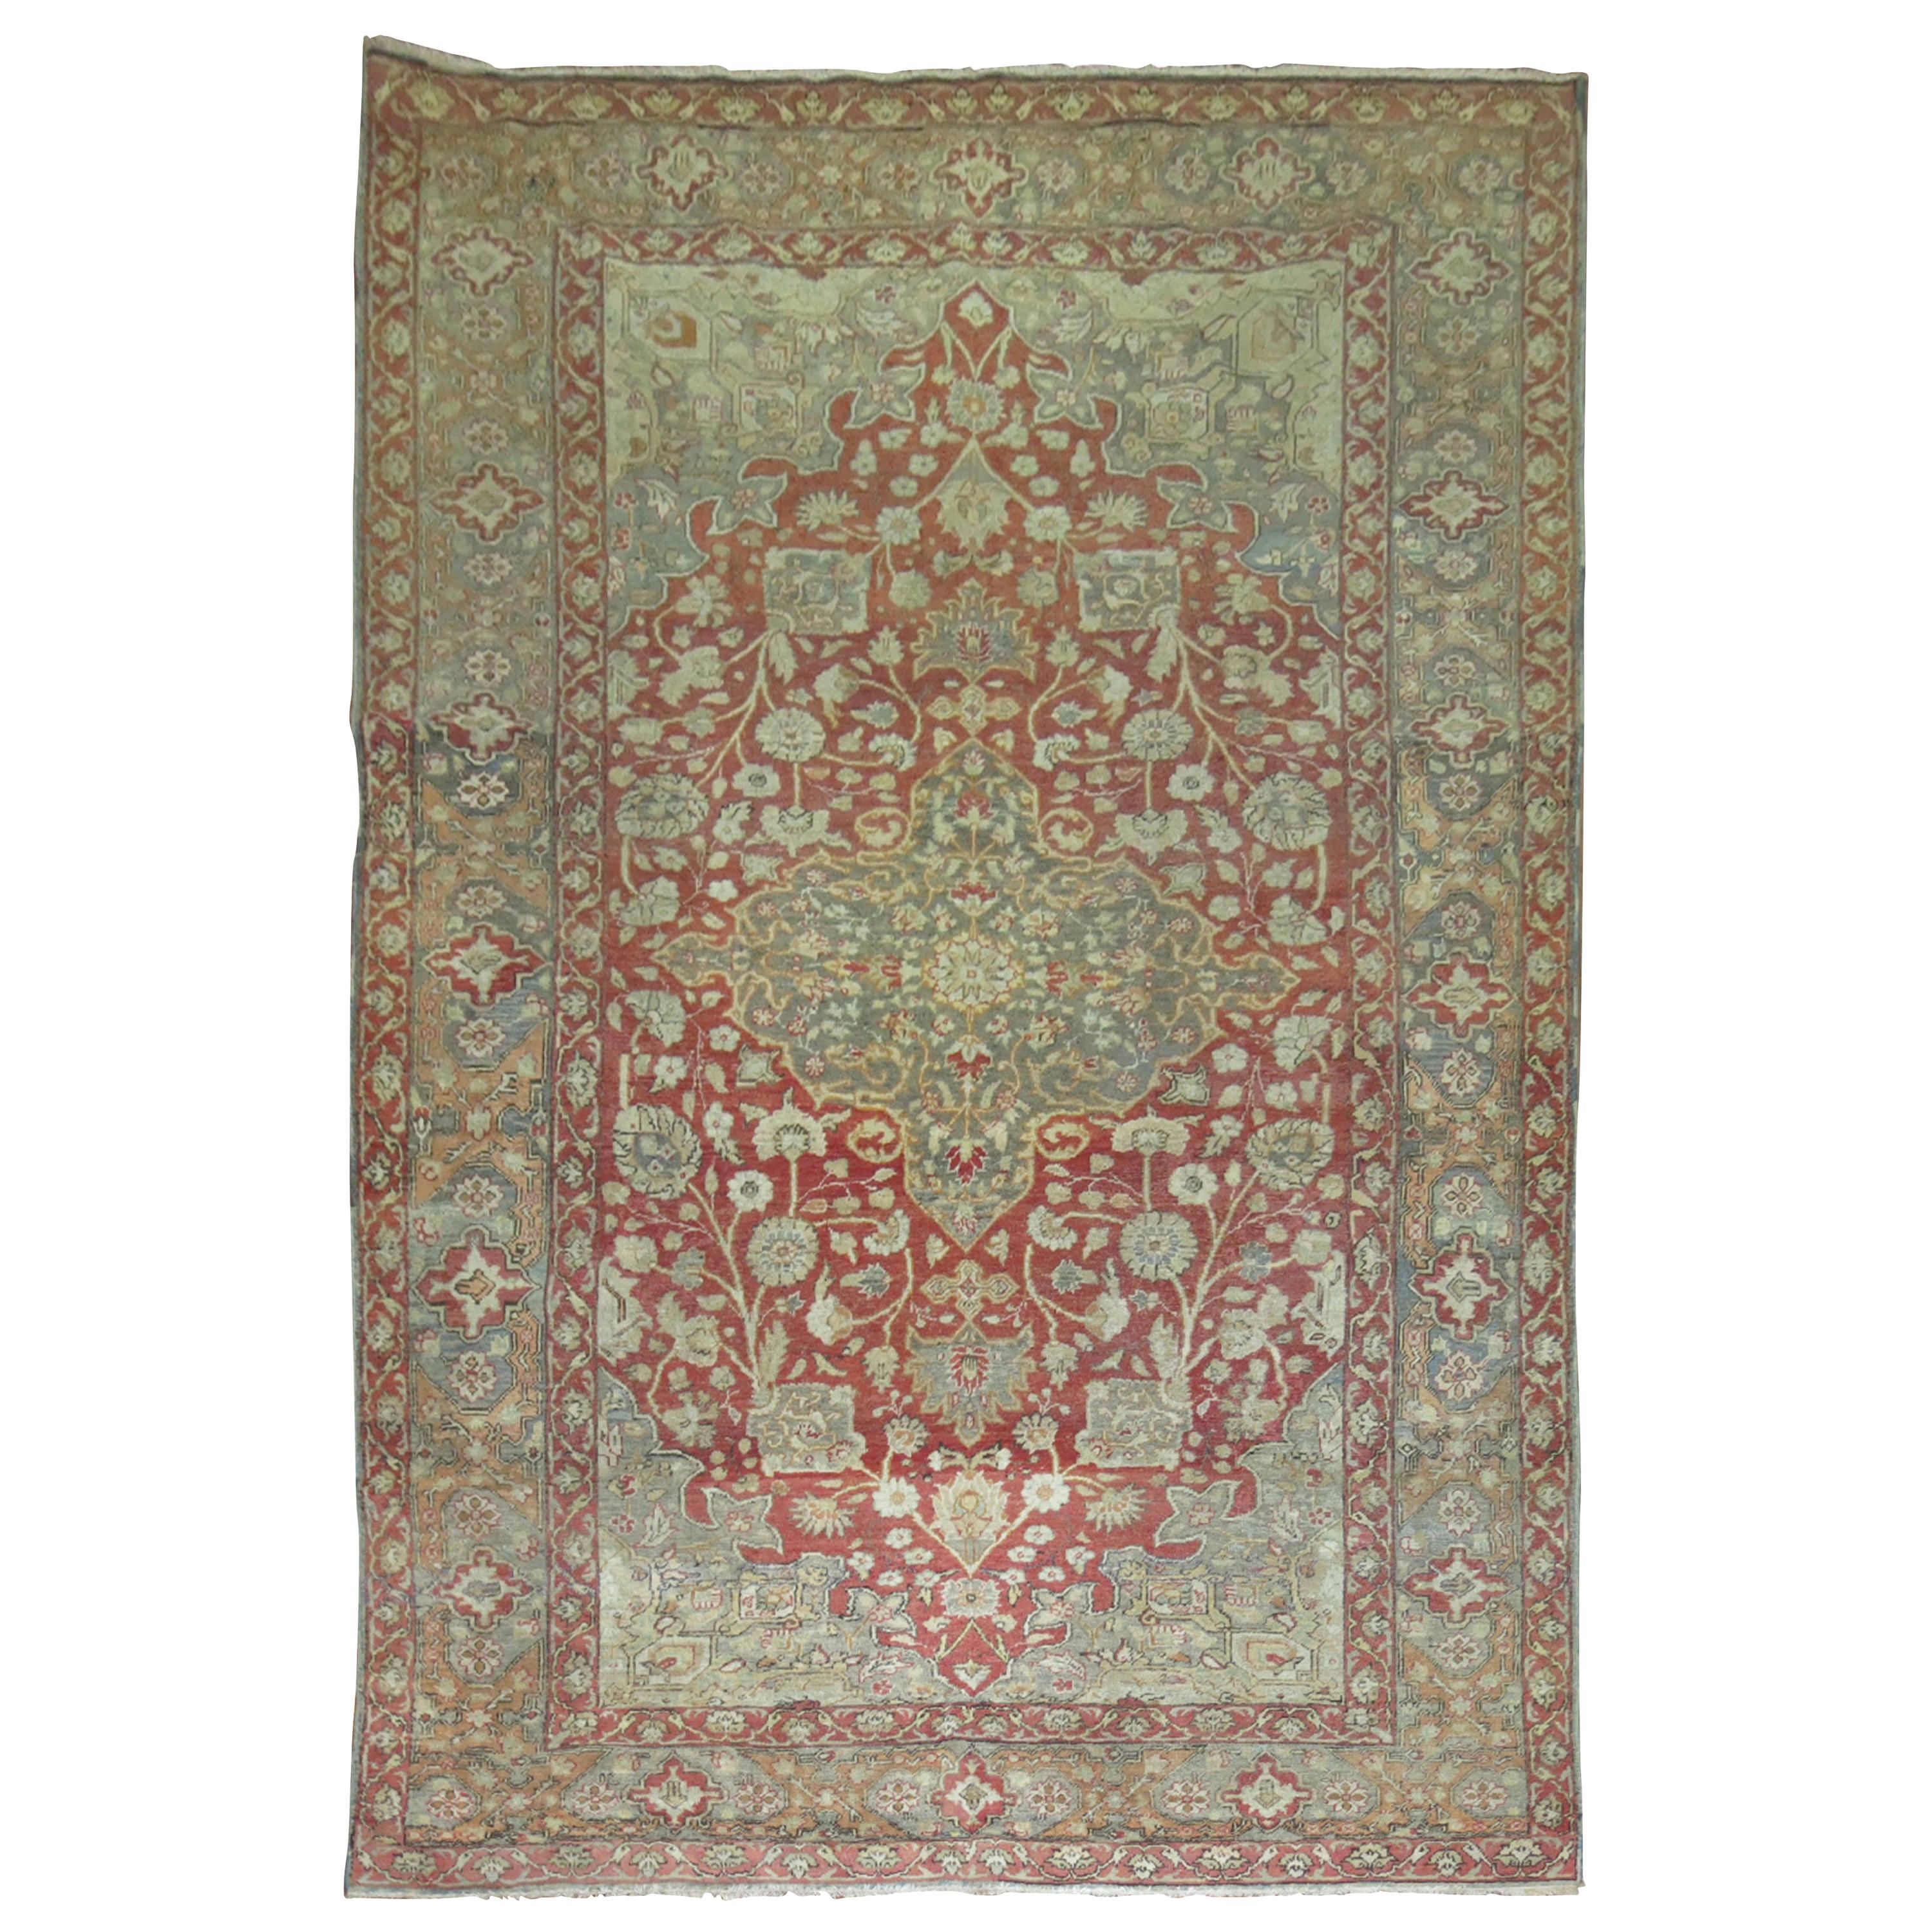 Rosy Red and Gray Antique Turkish Sivas Carpet